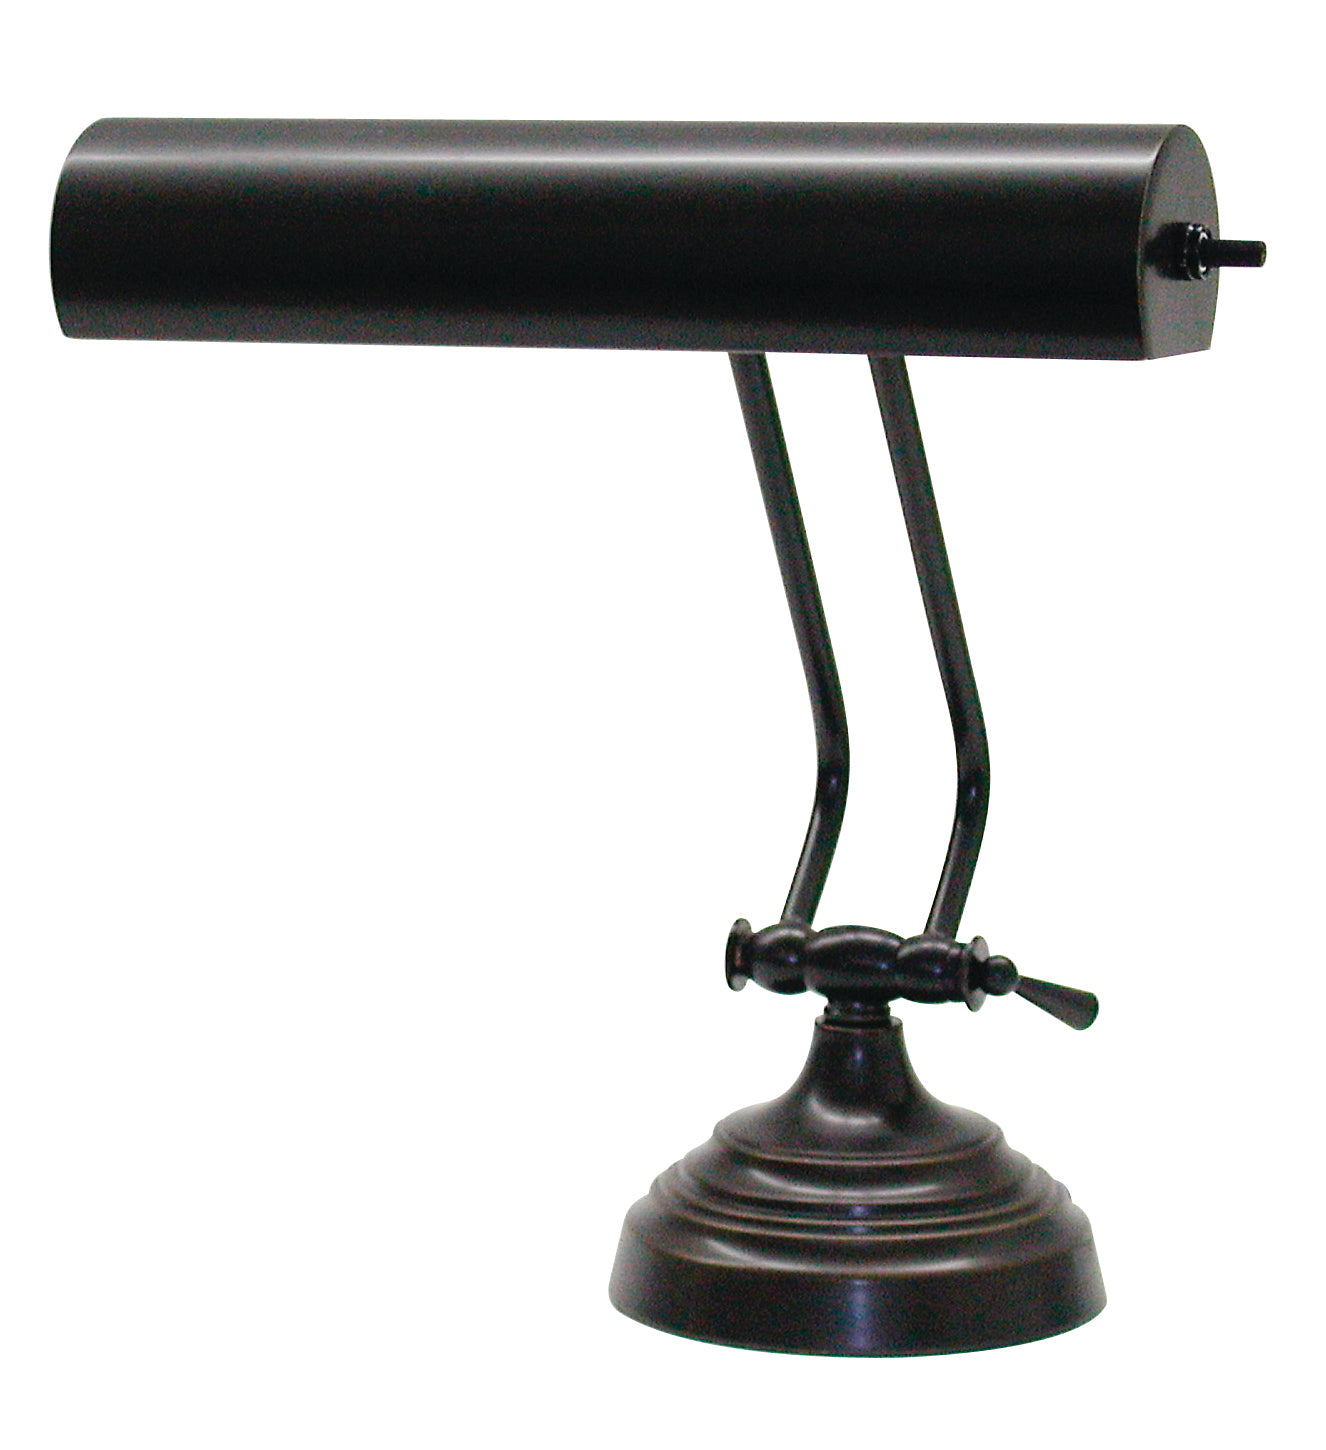 House of Troy Advent 10" Oil Rubbed Bronze Piano Desk Lamp AP10-21-91